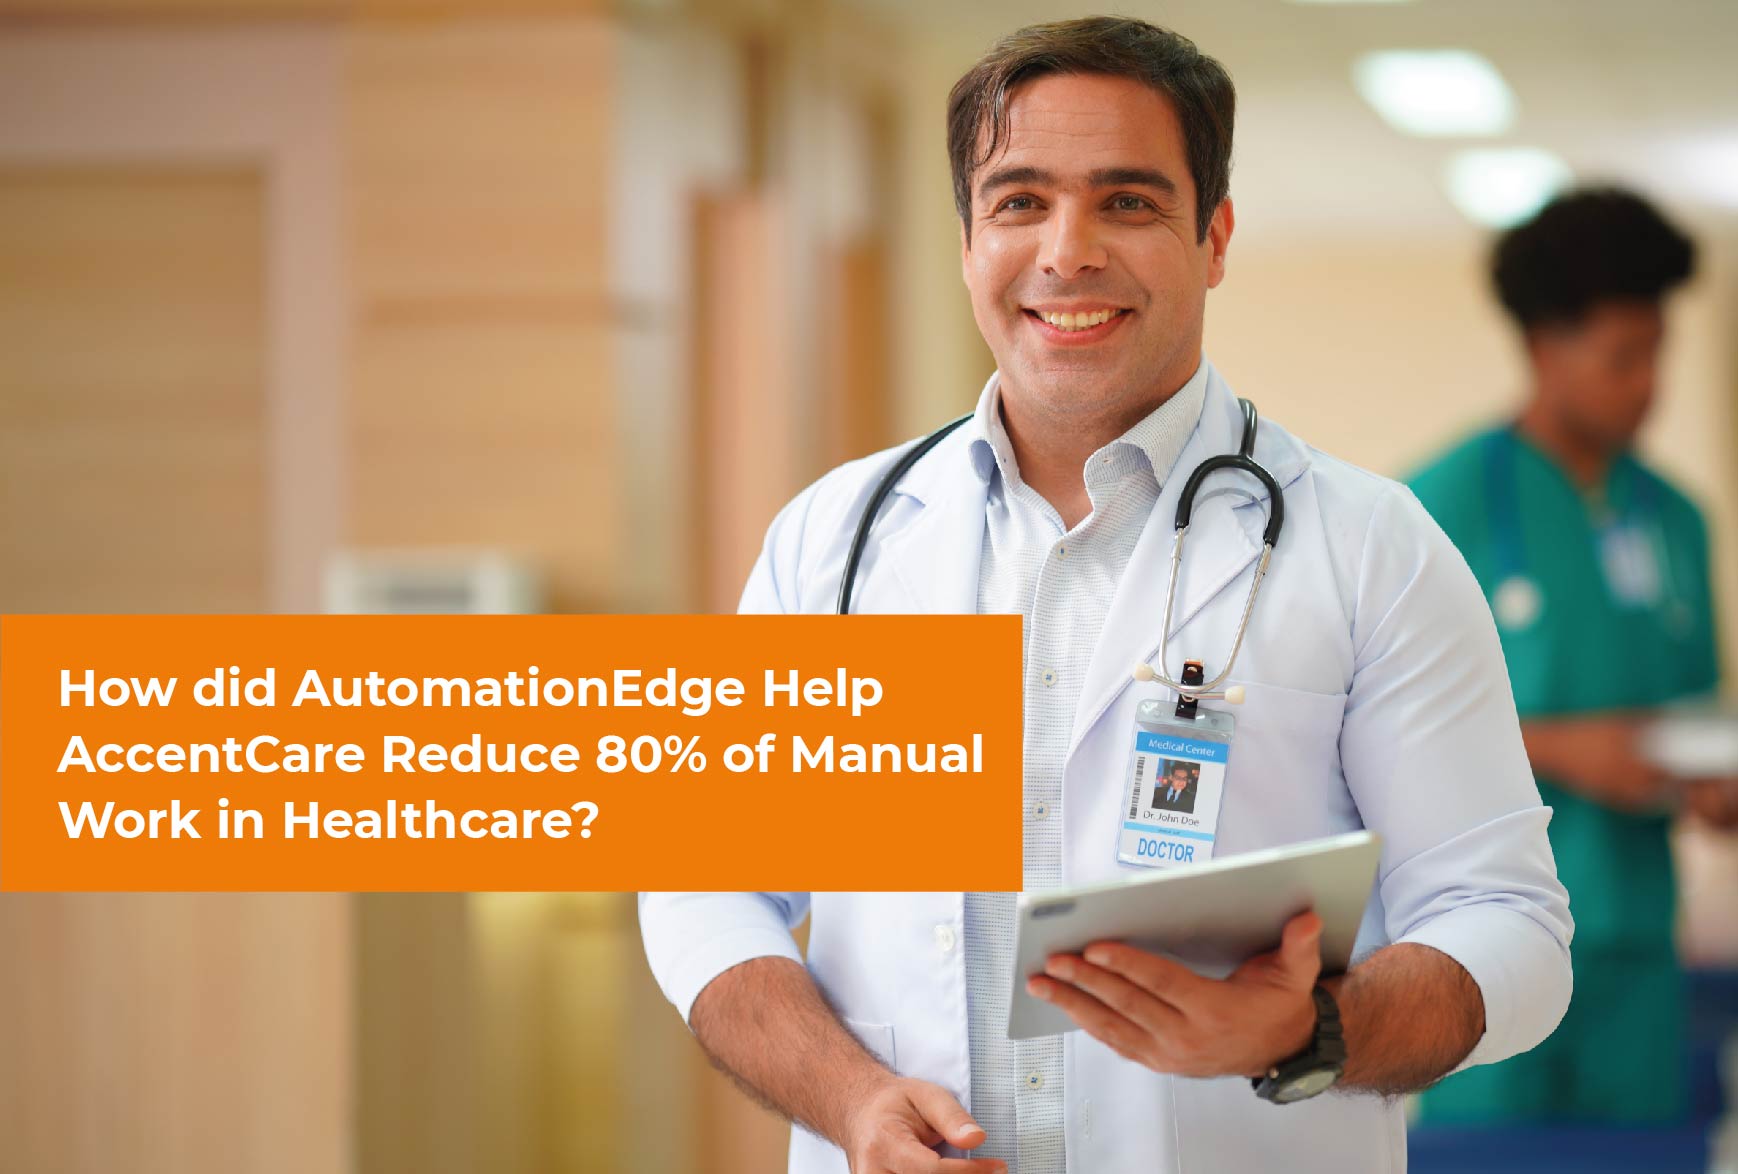 How did AccentCare Reduce 80% of Manual Work With AutomationEdge’s RPA?